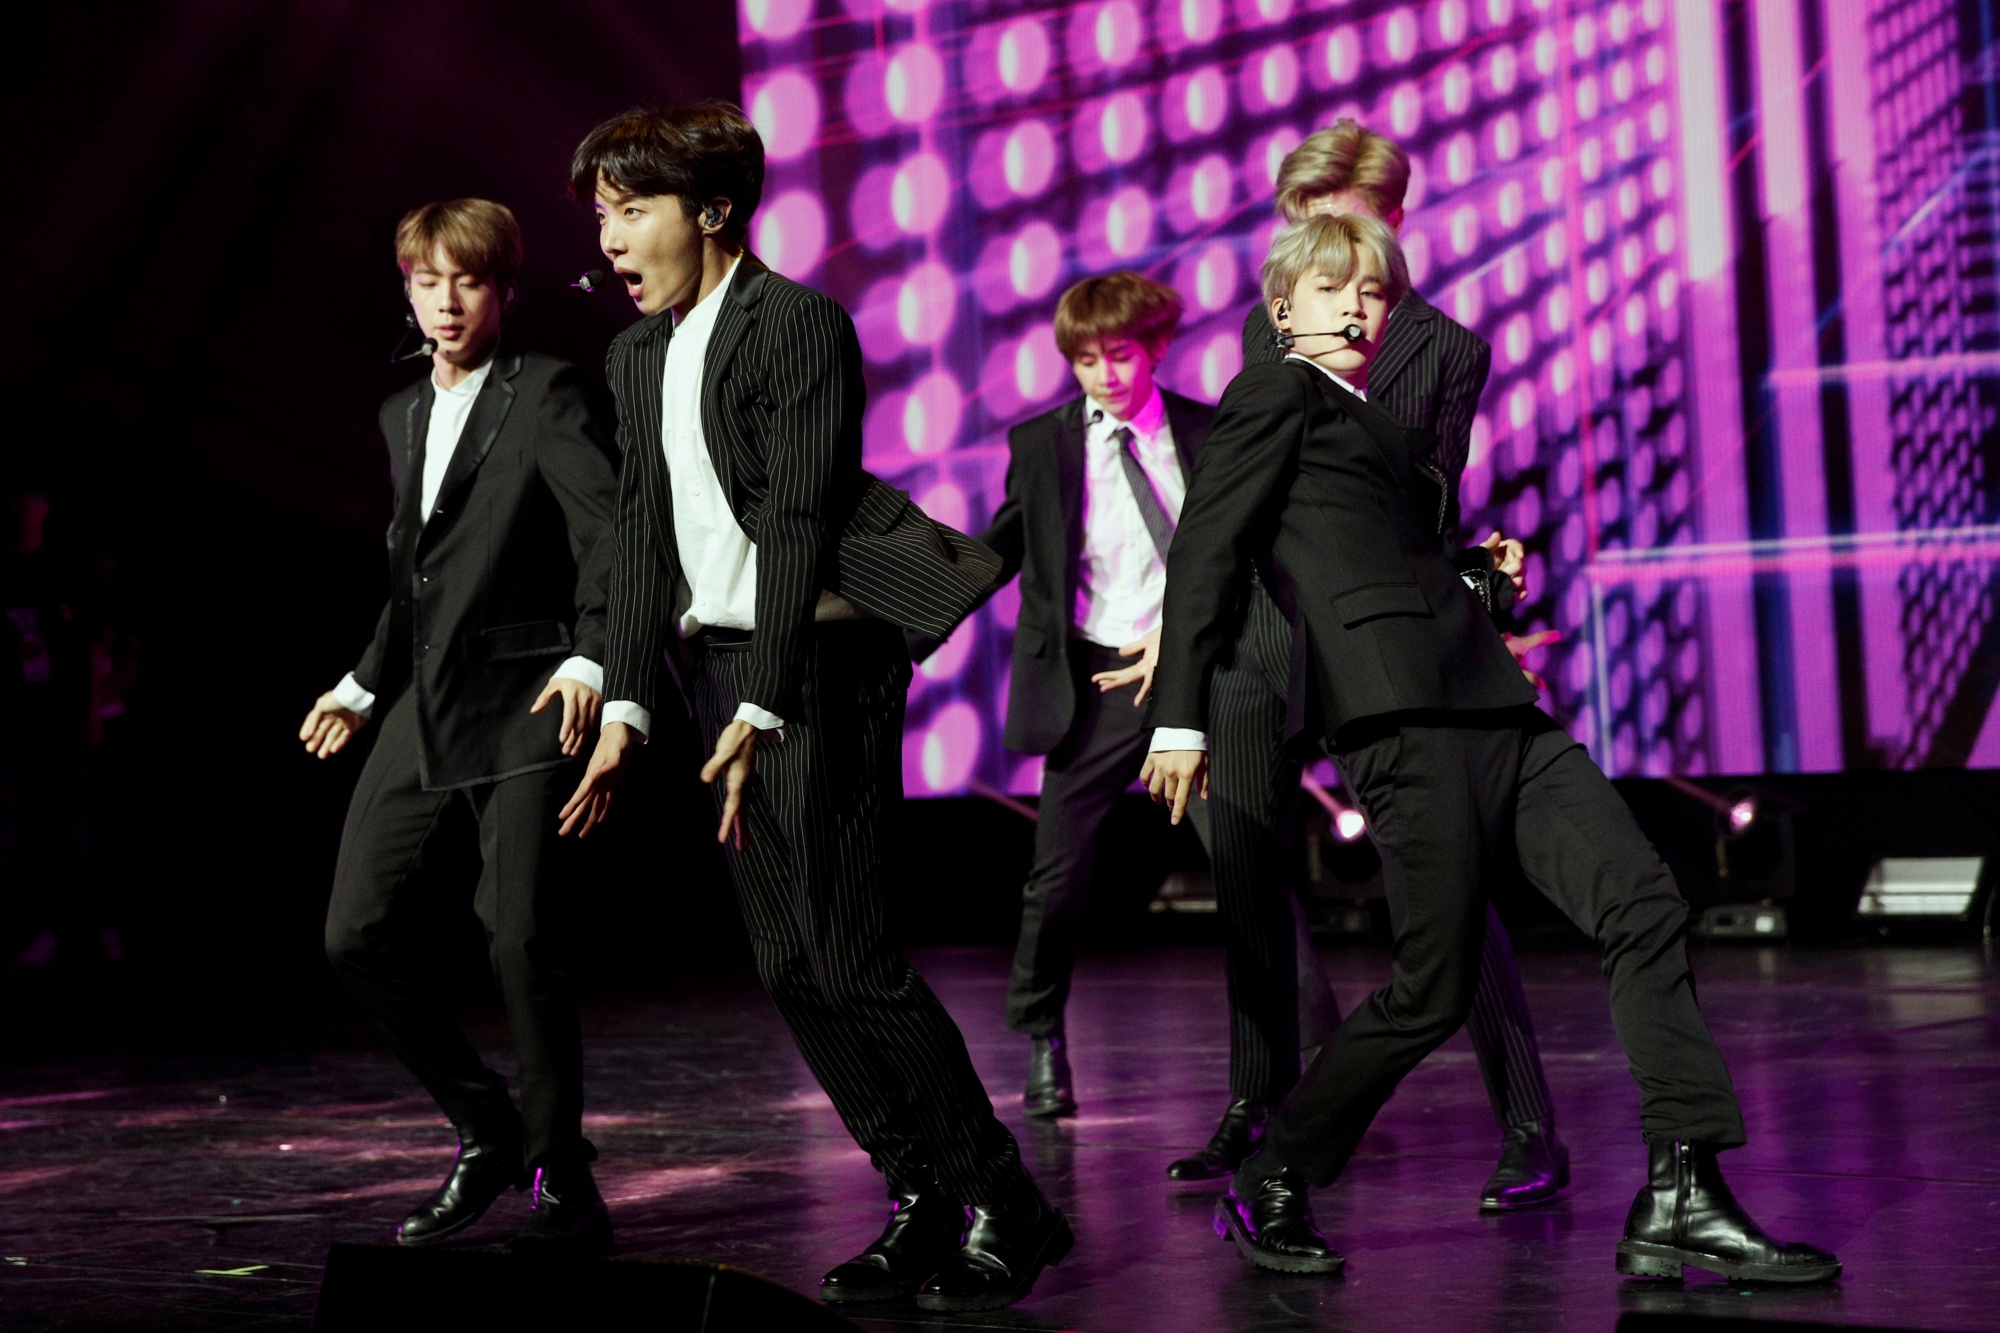 BTS photos: Look back at milestone moments for the K-pop stars